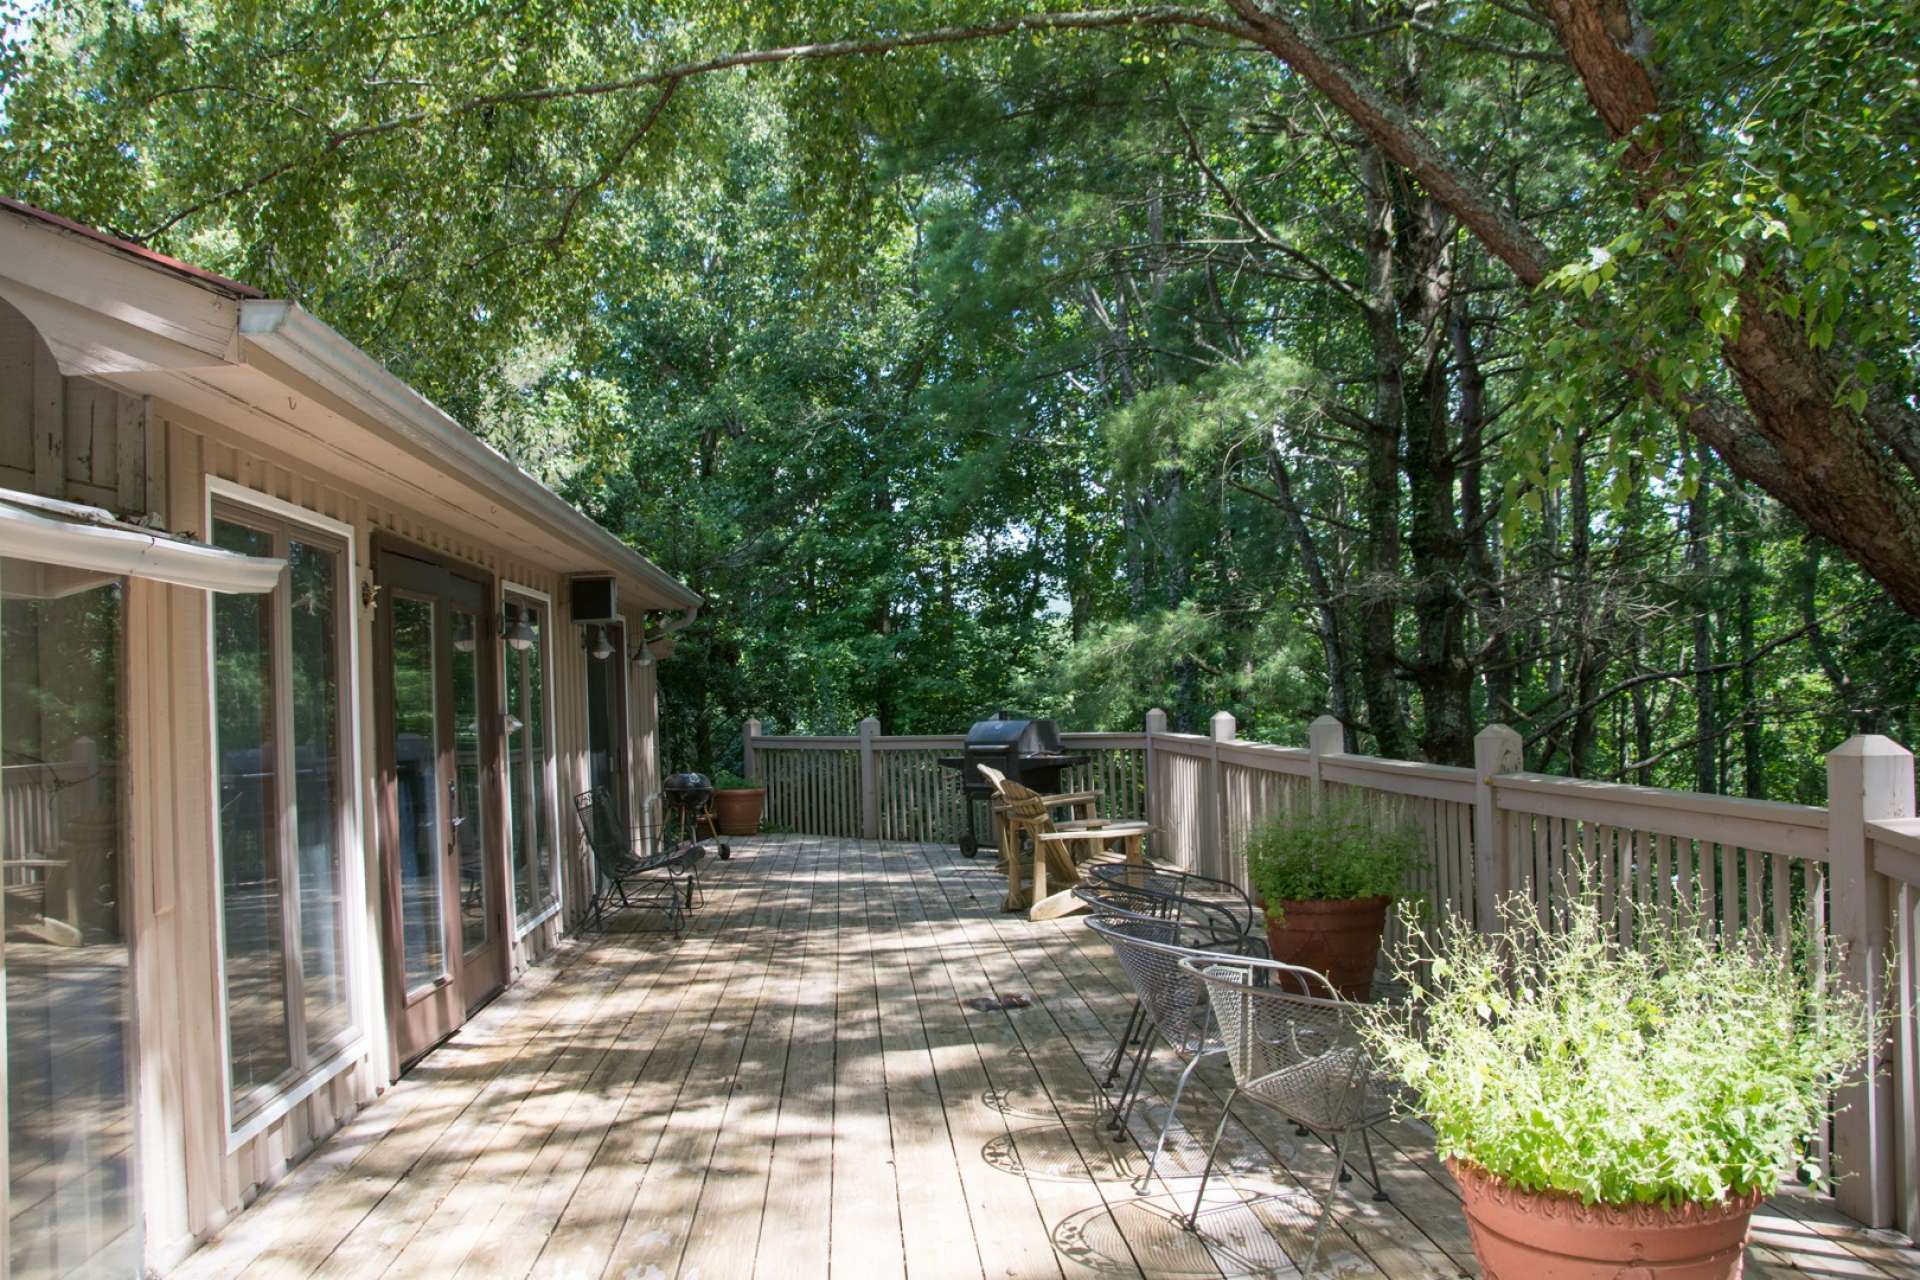 Or, you might want to enjoy alfresco dining out on the open deck surrounded by trees, birds and Nature.